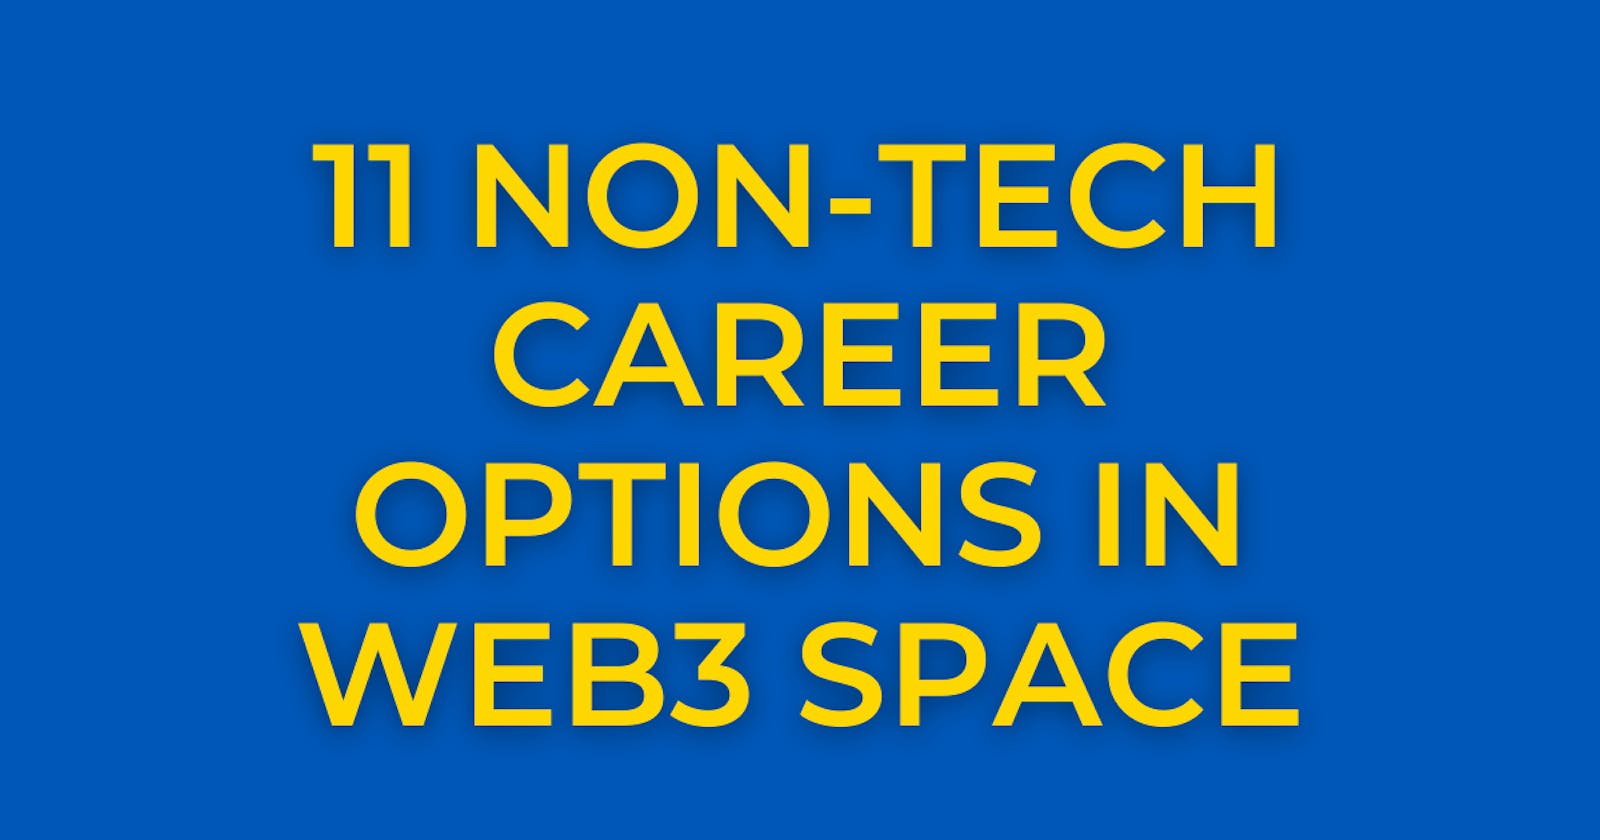 11 Non-Tech Career Options in Web3 Space